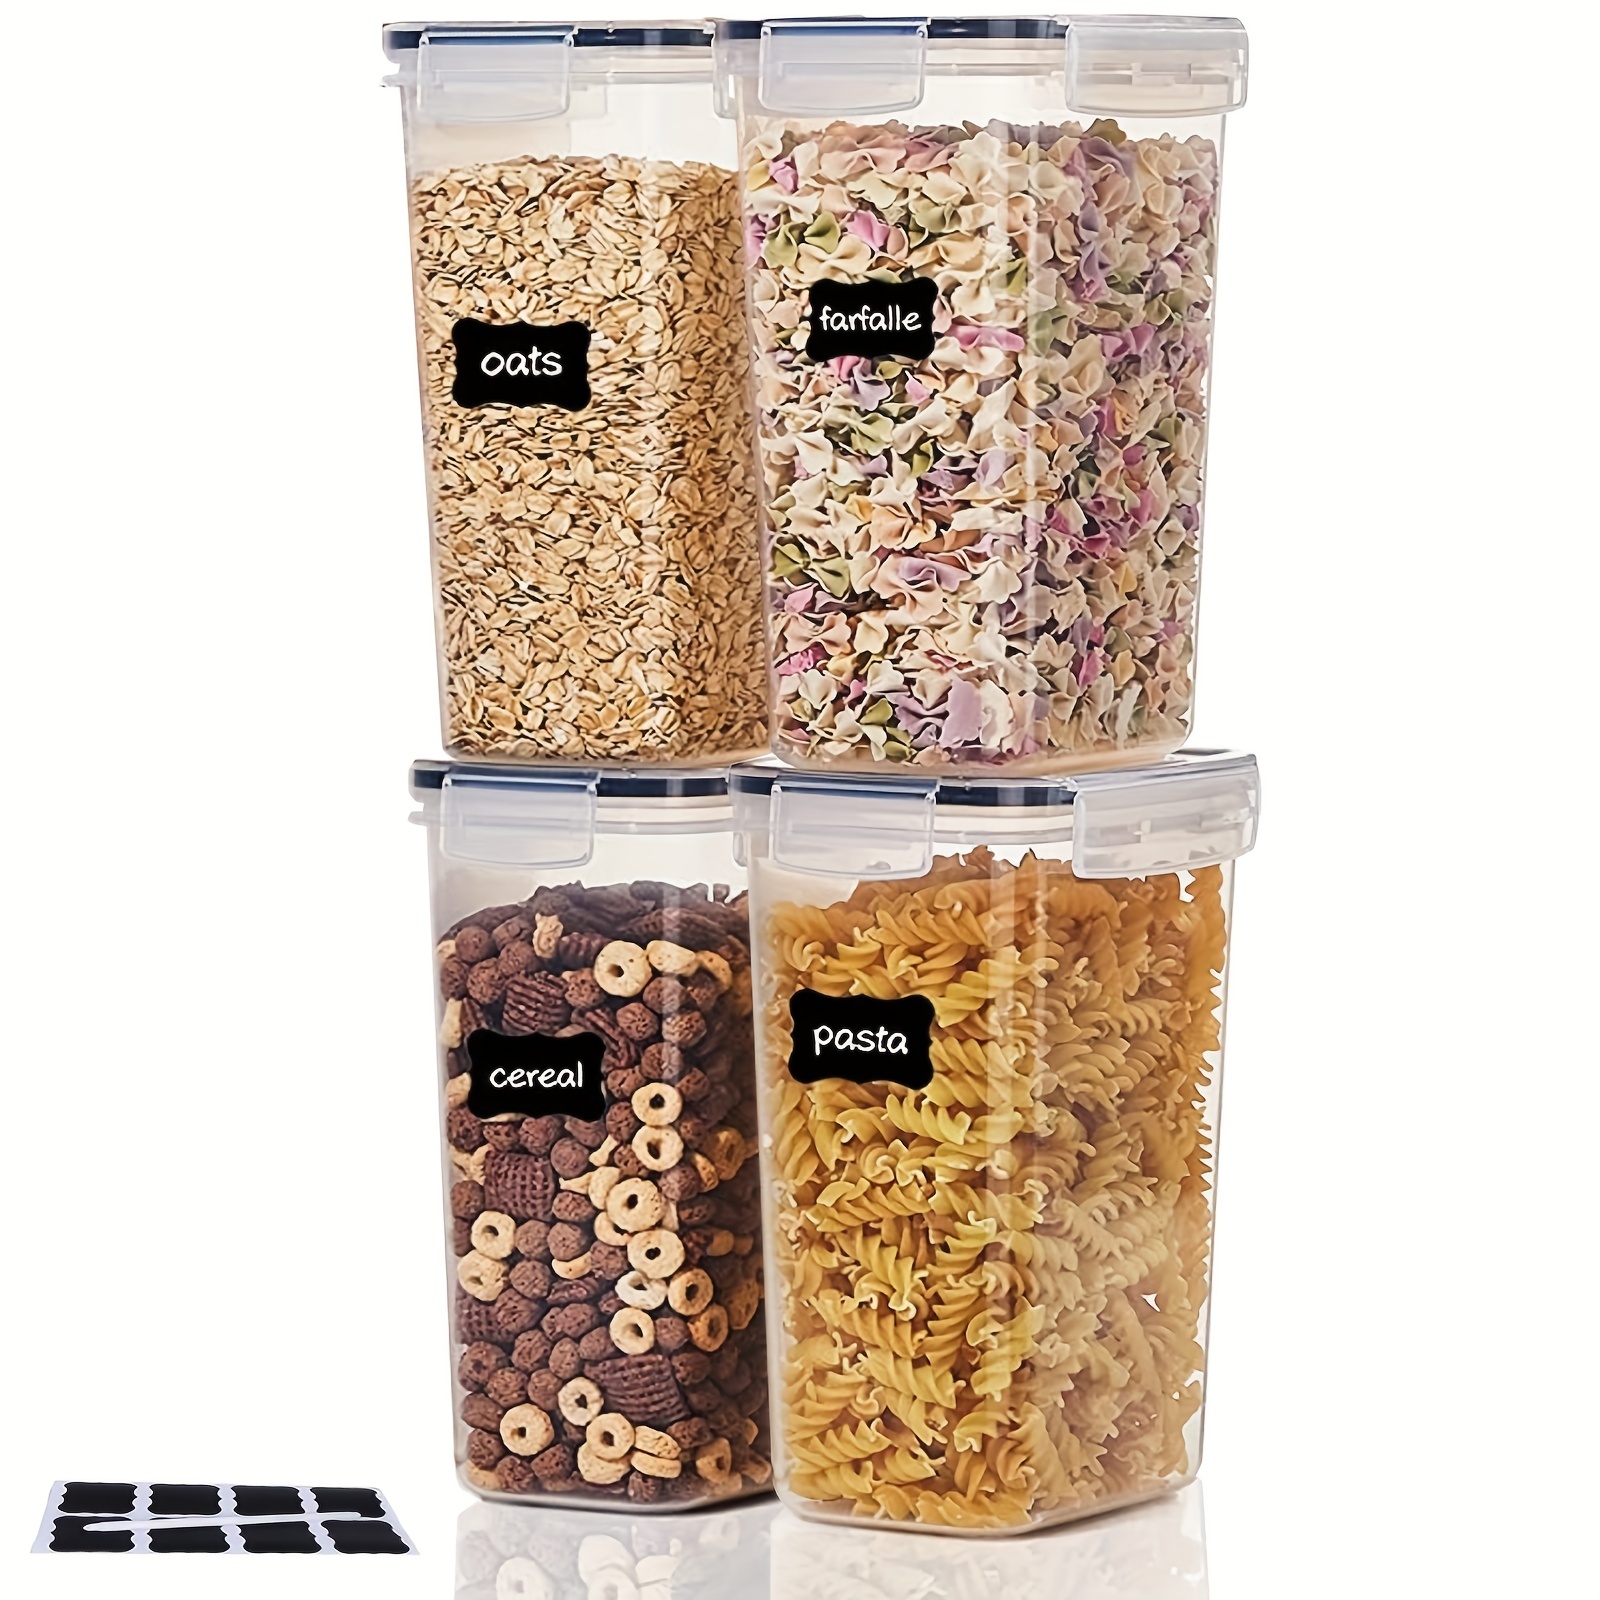 9pcs Airtight Food Storage Containers With Lids, Bpa-free Plastic Dry Food  Canisters For Kitchen Pantry Organization And Storage, Dishwasher Safe,  With Labels And Marker, For Cereals, Rice, Pasta, Tea, Nuts